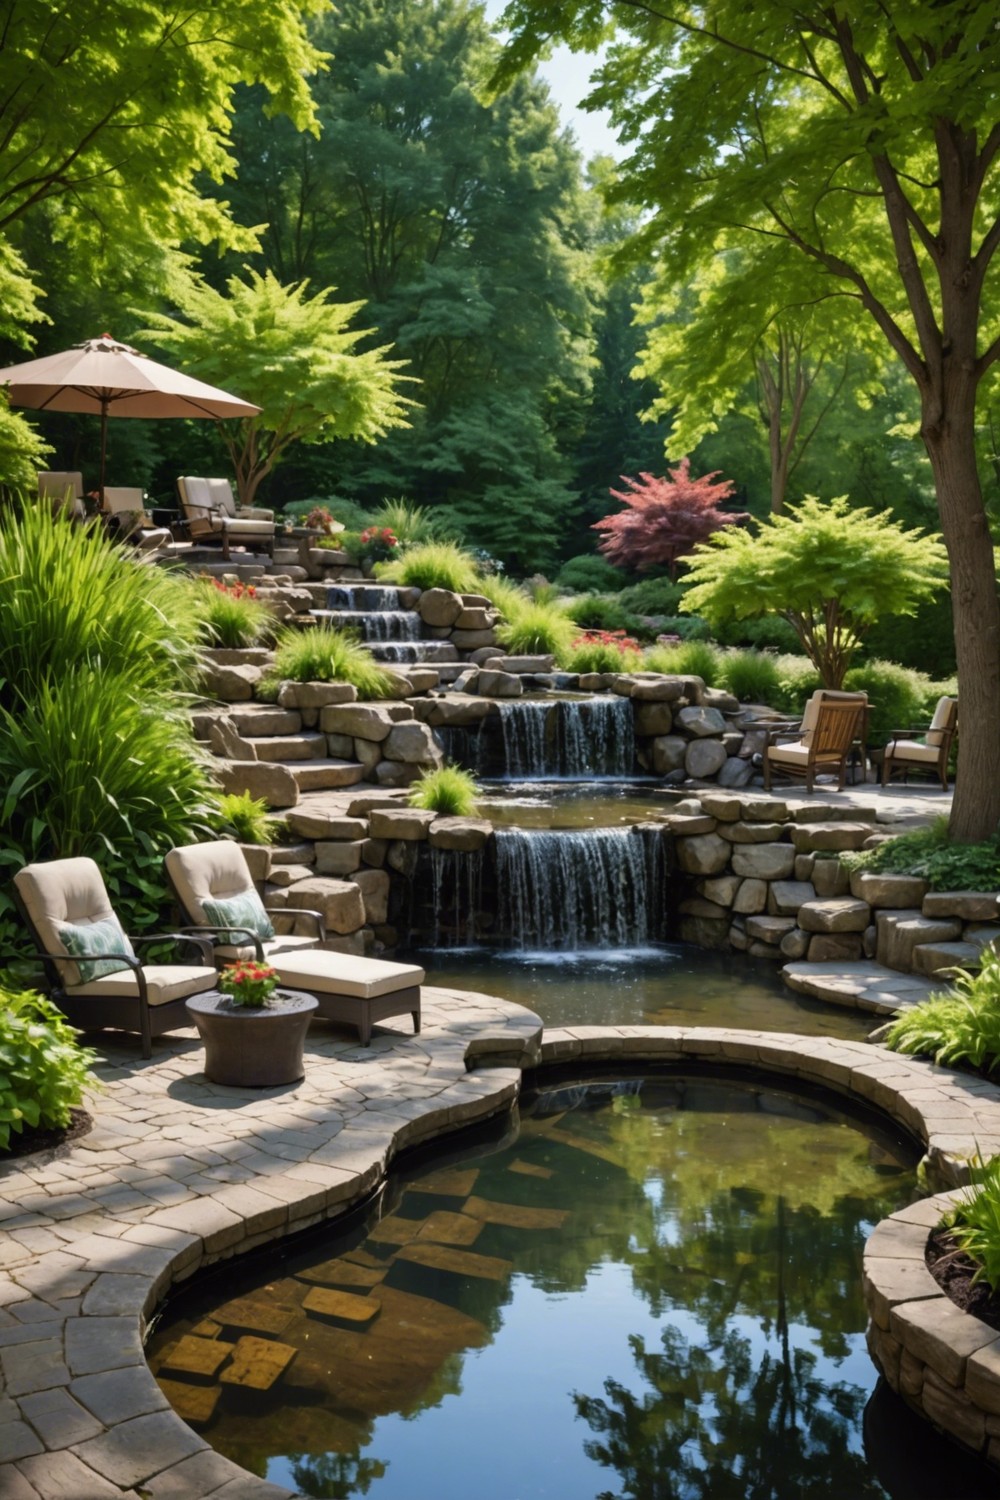 Cascading Water Features for a Soothing Sound